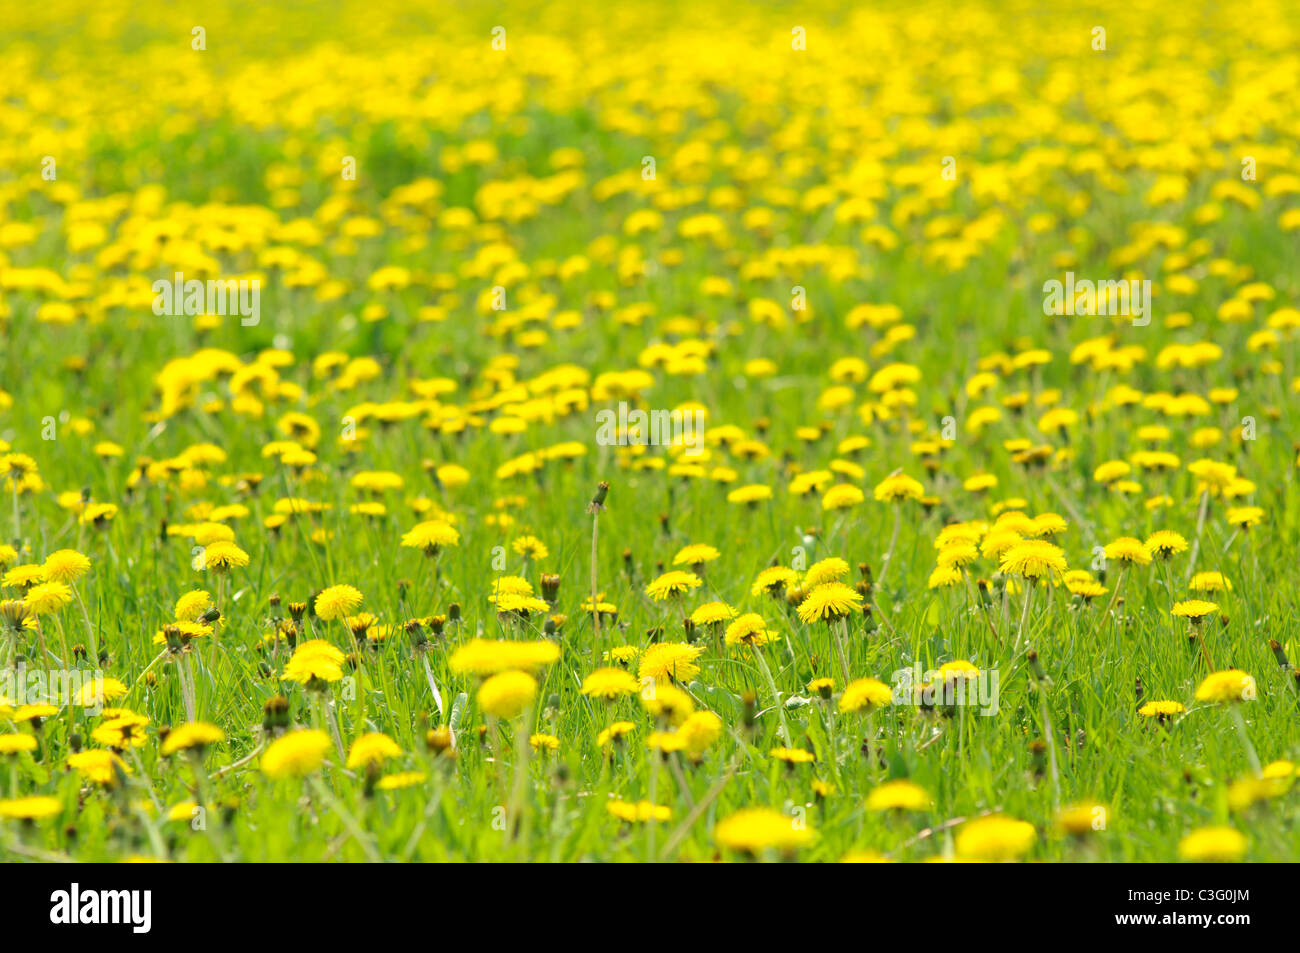 Meadow full of dandelions. Quite shallow depth of field Stock Photo